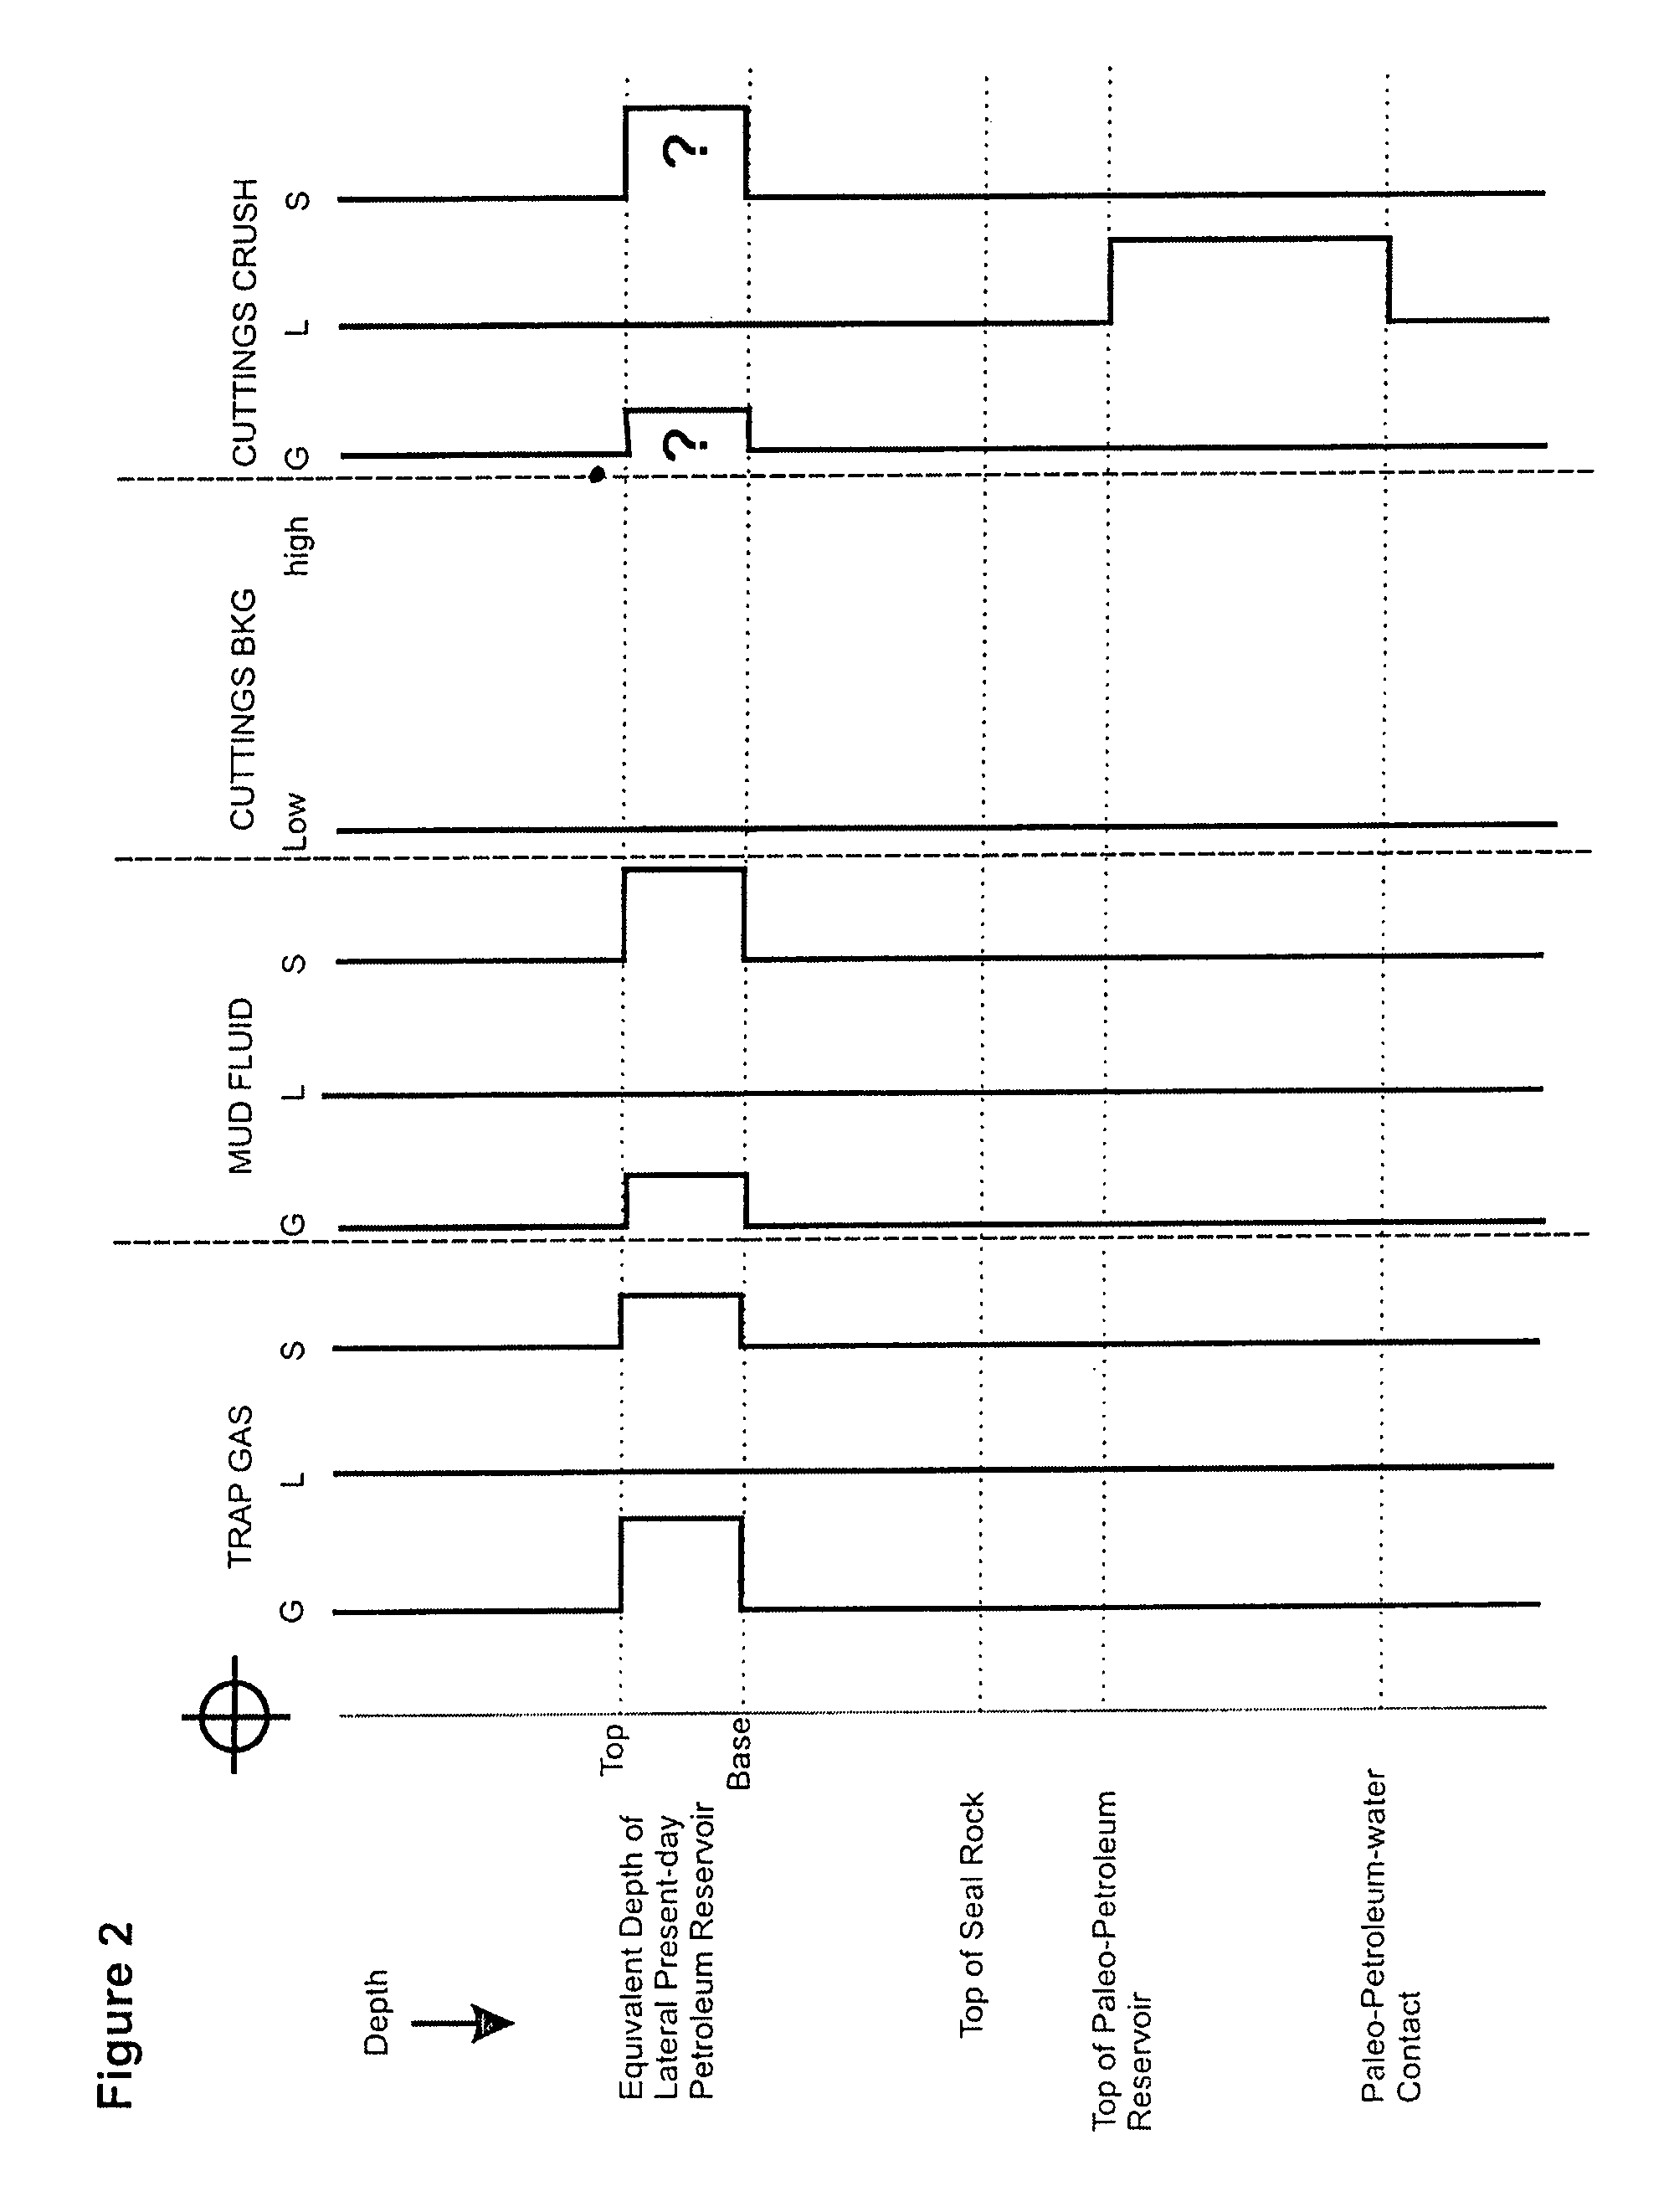 Method and apparatus for determining gas content of subsurface fluids for oil and gas exploration